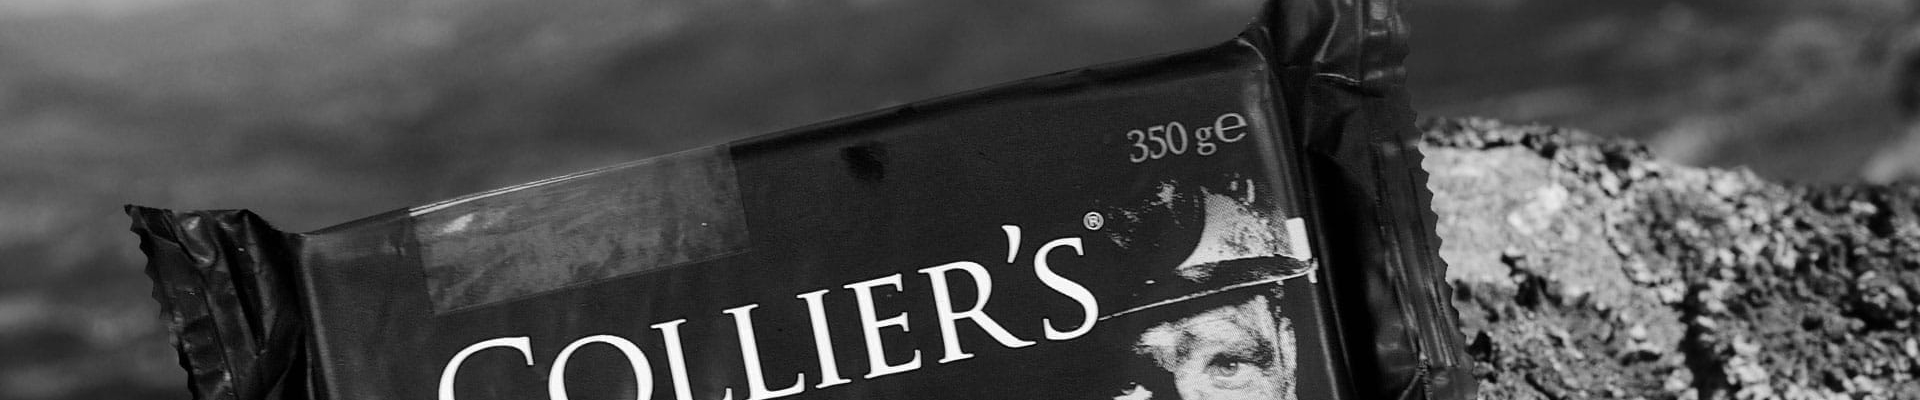 Colliers Cheese Privacy Statement